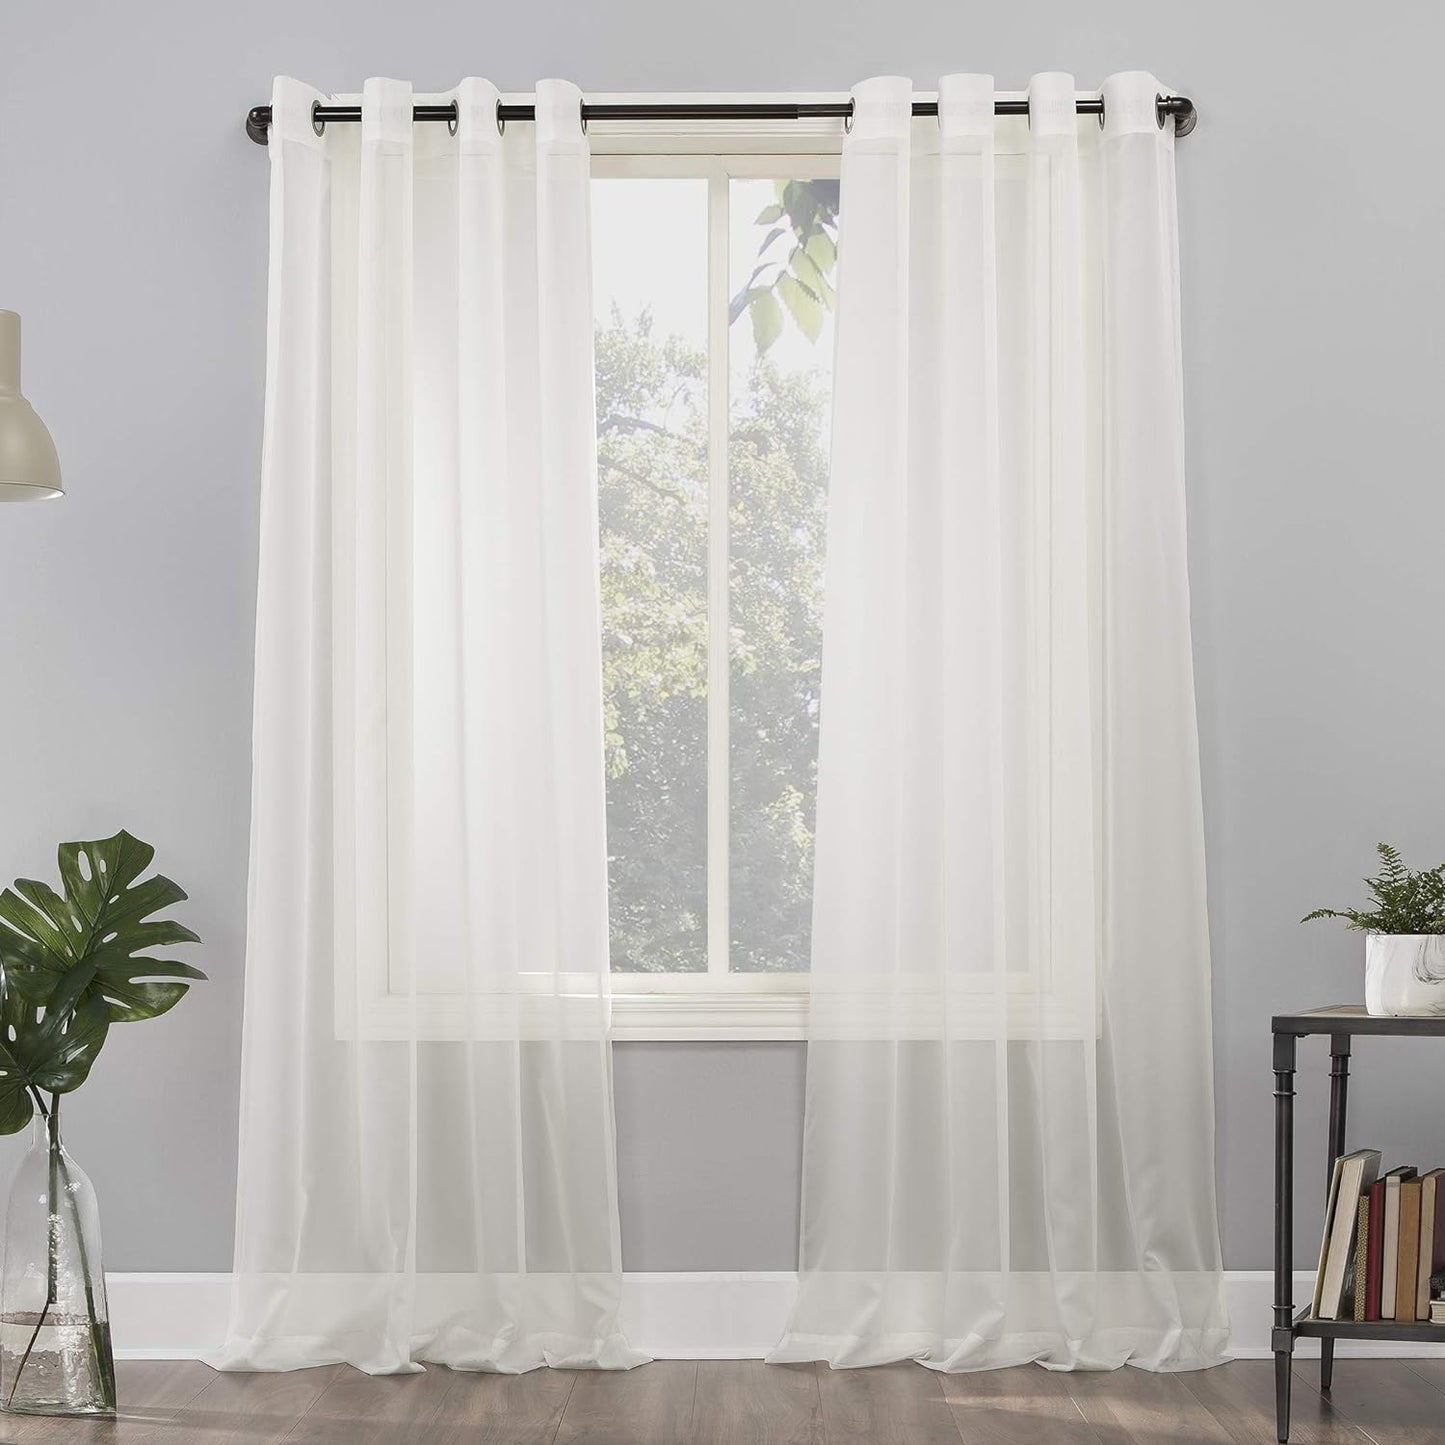 No. 918 Emily Sheer Voile Grommet Curtain Panel, 59" X 95", White  No. 918 Eggshell Off-White Curtain Panel 59" X 120"